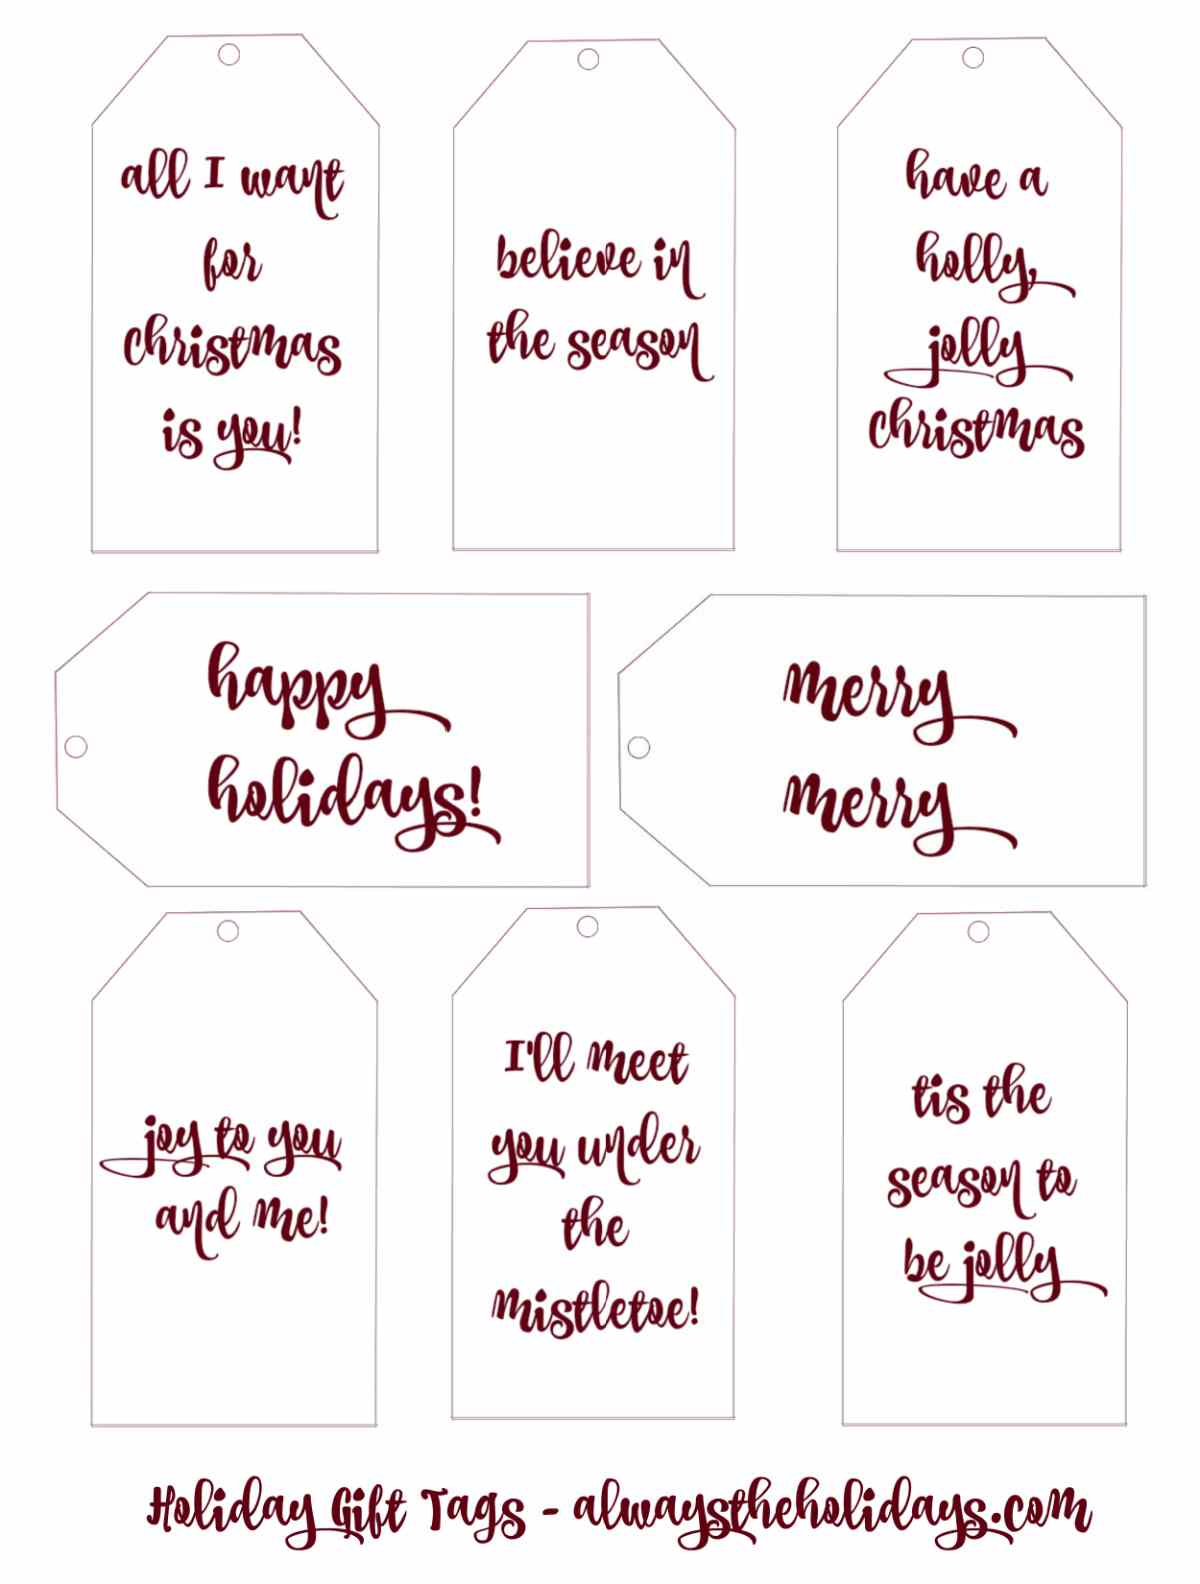 Holiday labels to print out with messages .